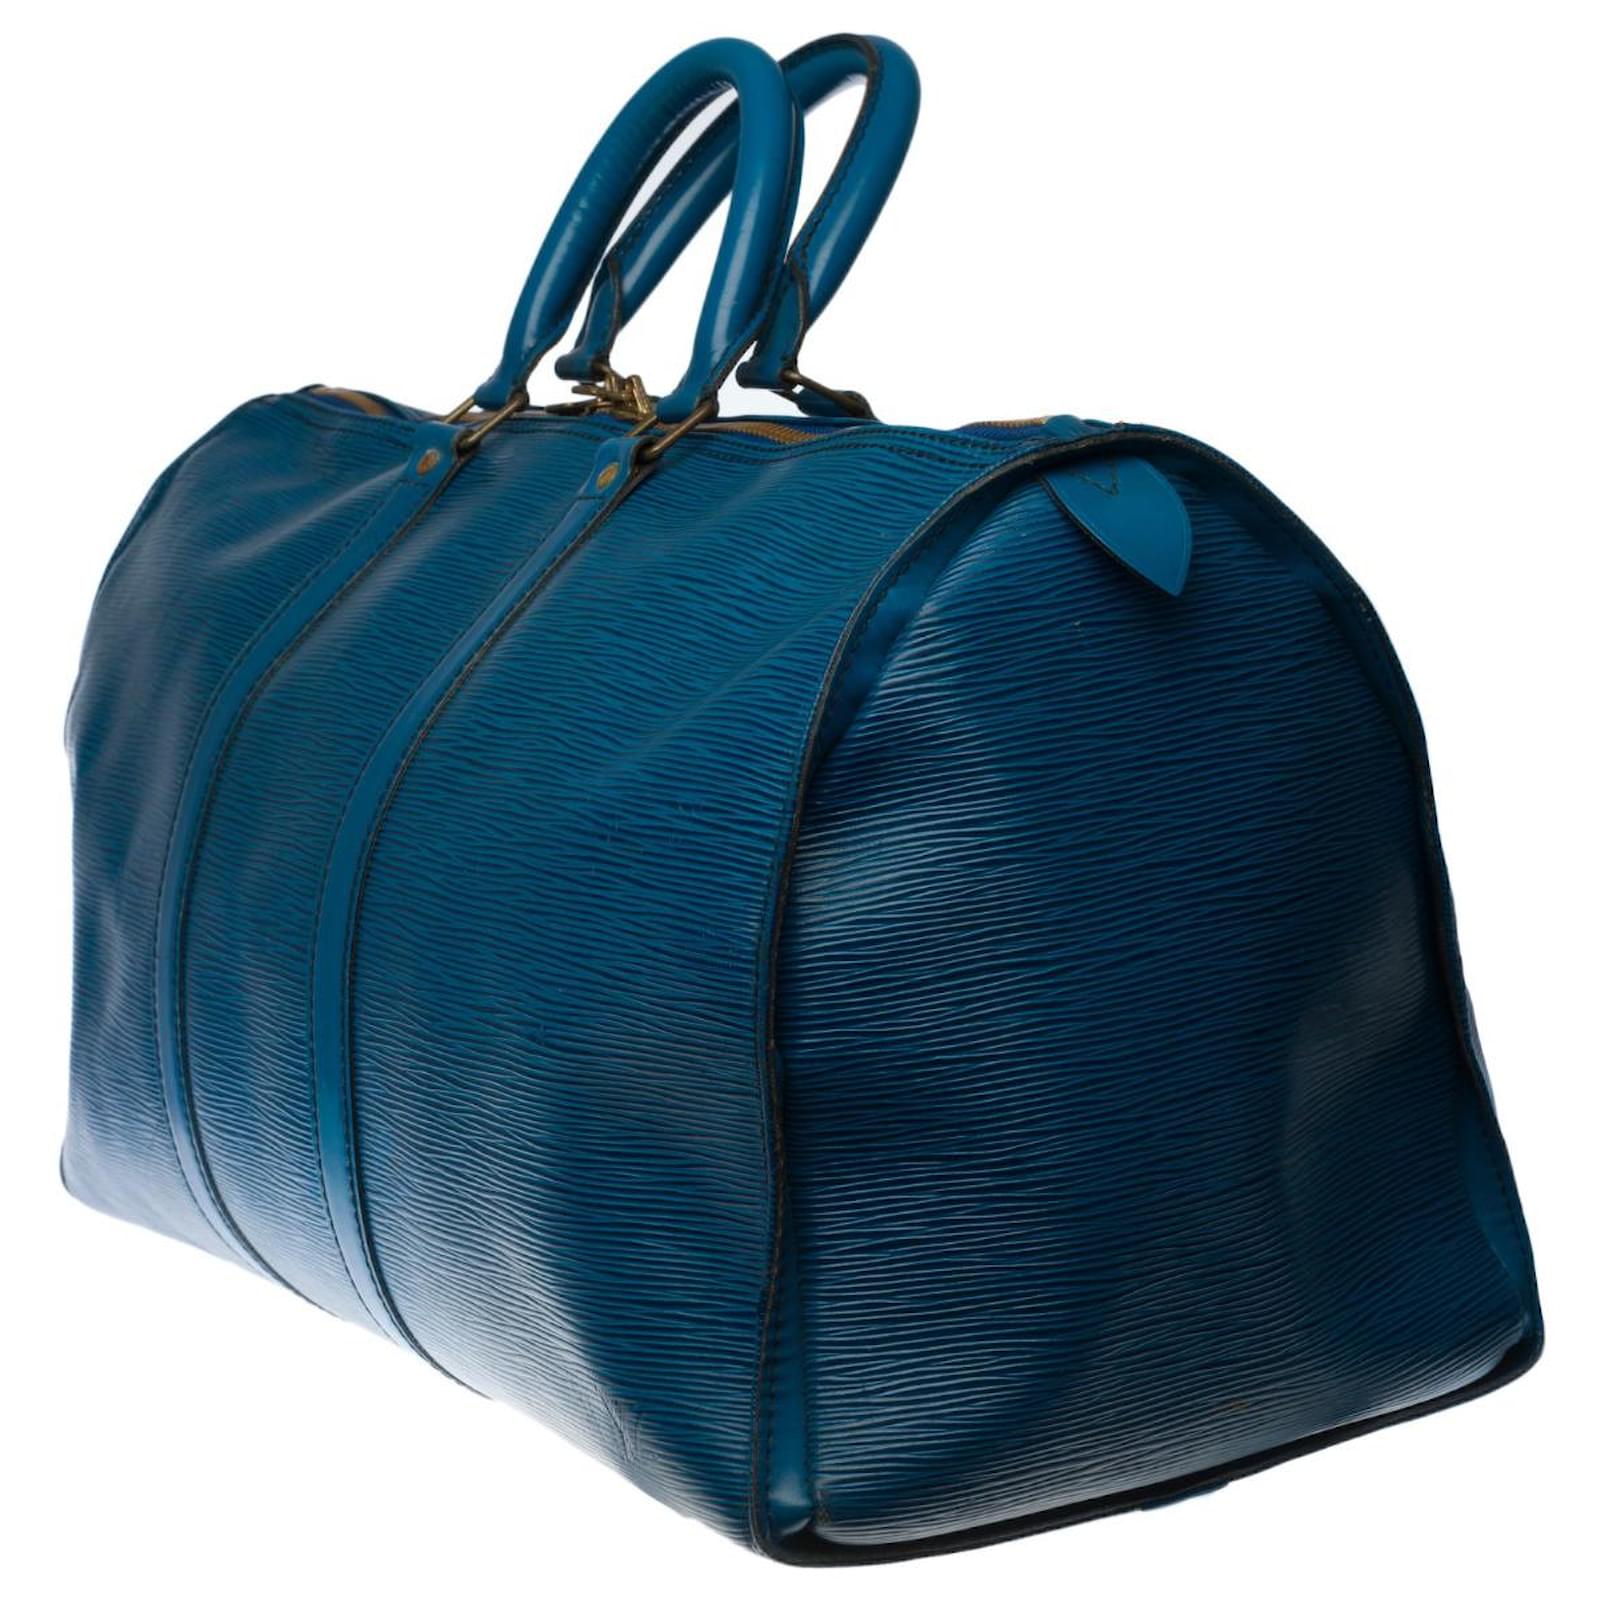 The very Chic Louis Vuitton Keepall 45 Travel bag in blue épi leather, GHW